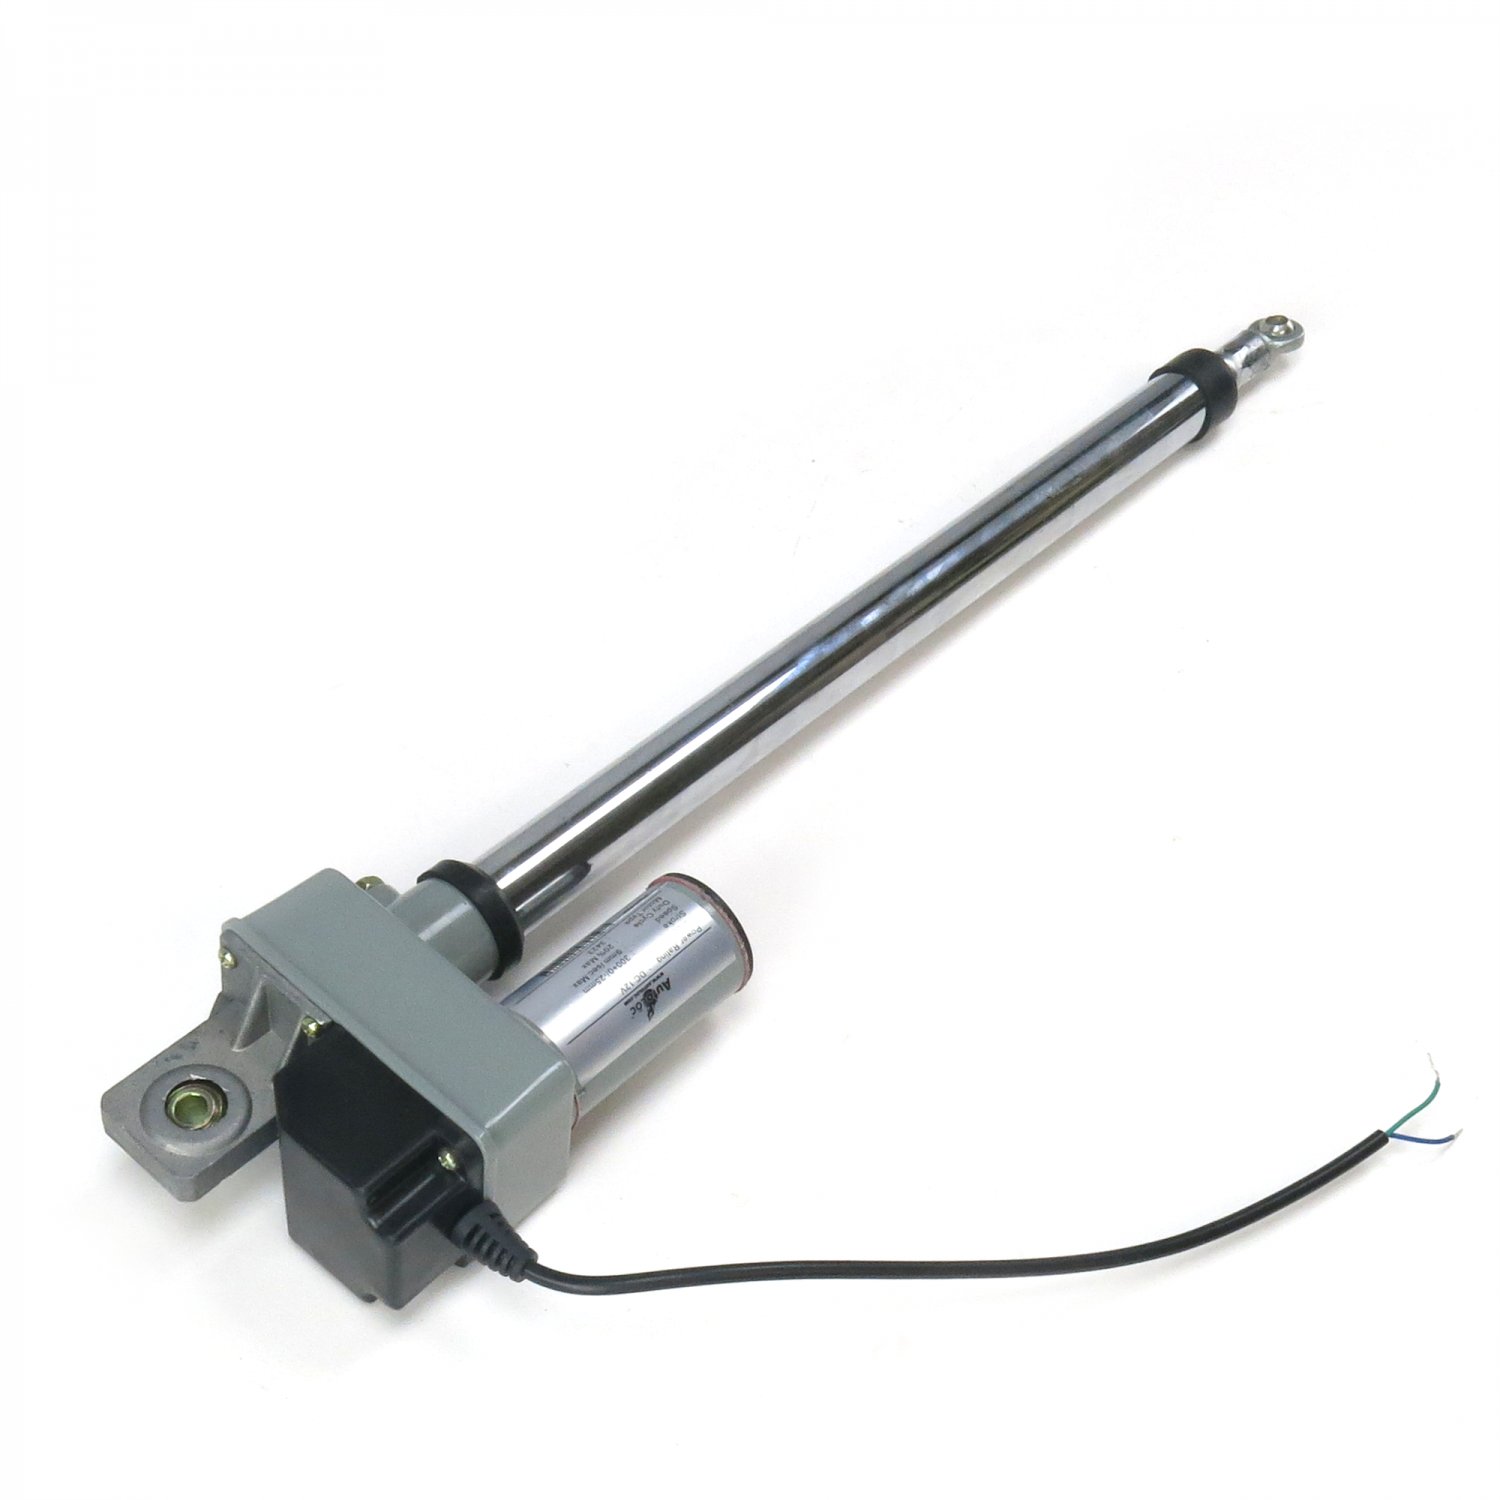 200 lbs AutoLoc Power Accessories 9782 6 Capacity Adjustable Linear Actuator with Rod Bearing, 